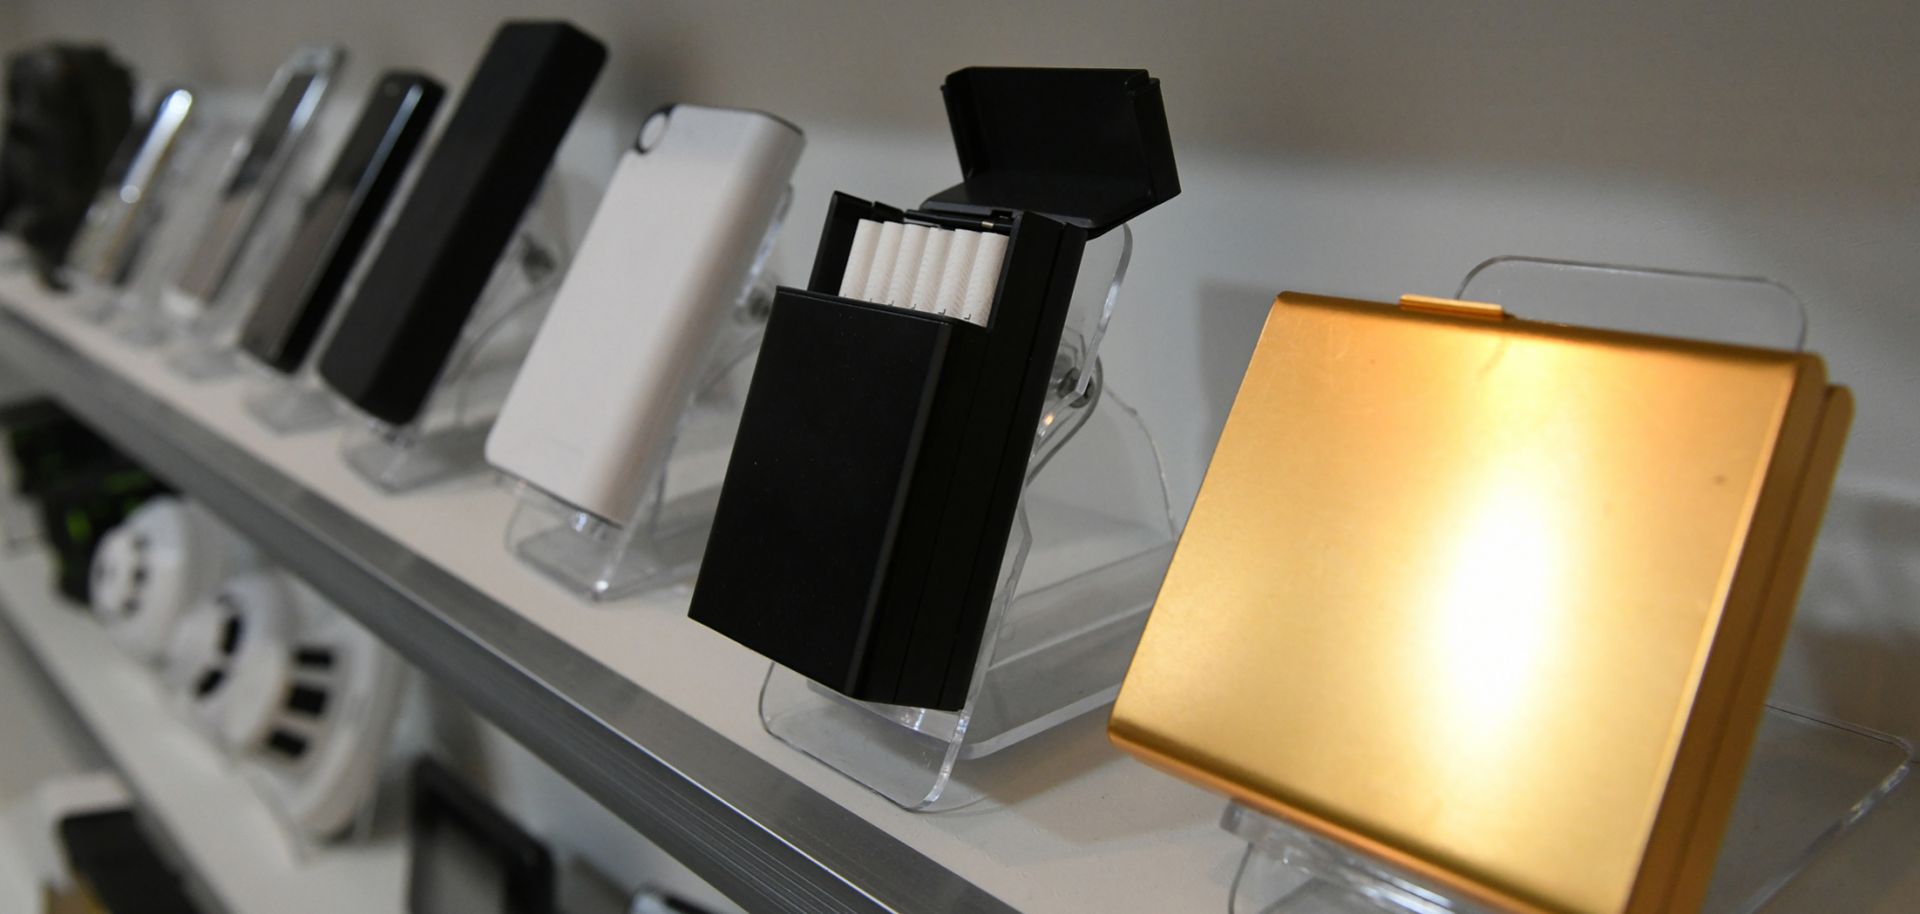 A shop in South Korea displays cigarette cases equipped with hidden cameras, among a wide selection of other spy cam devices. 